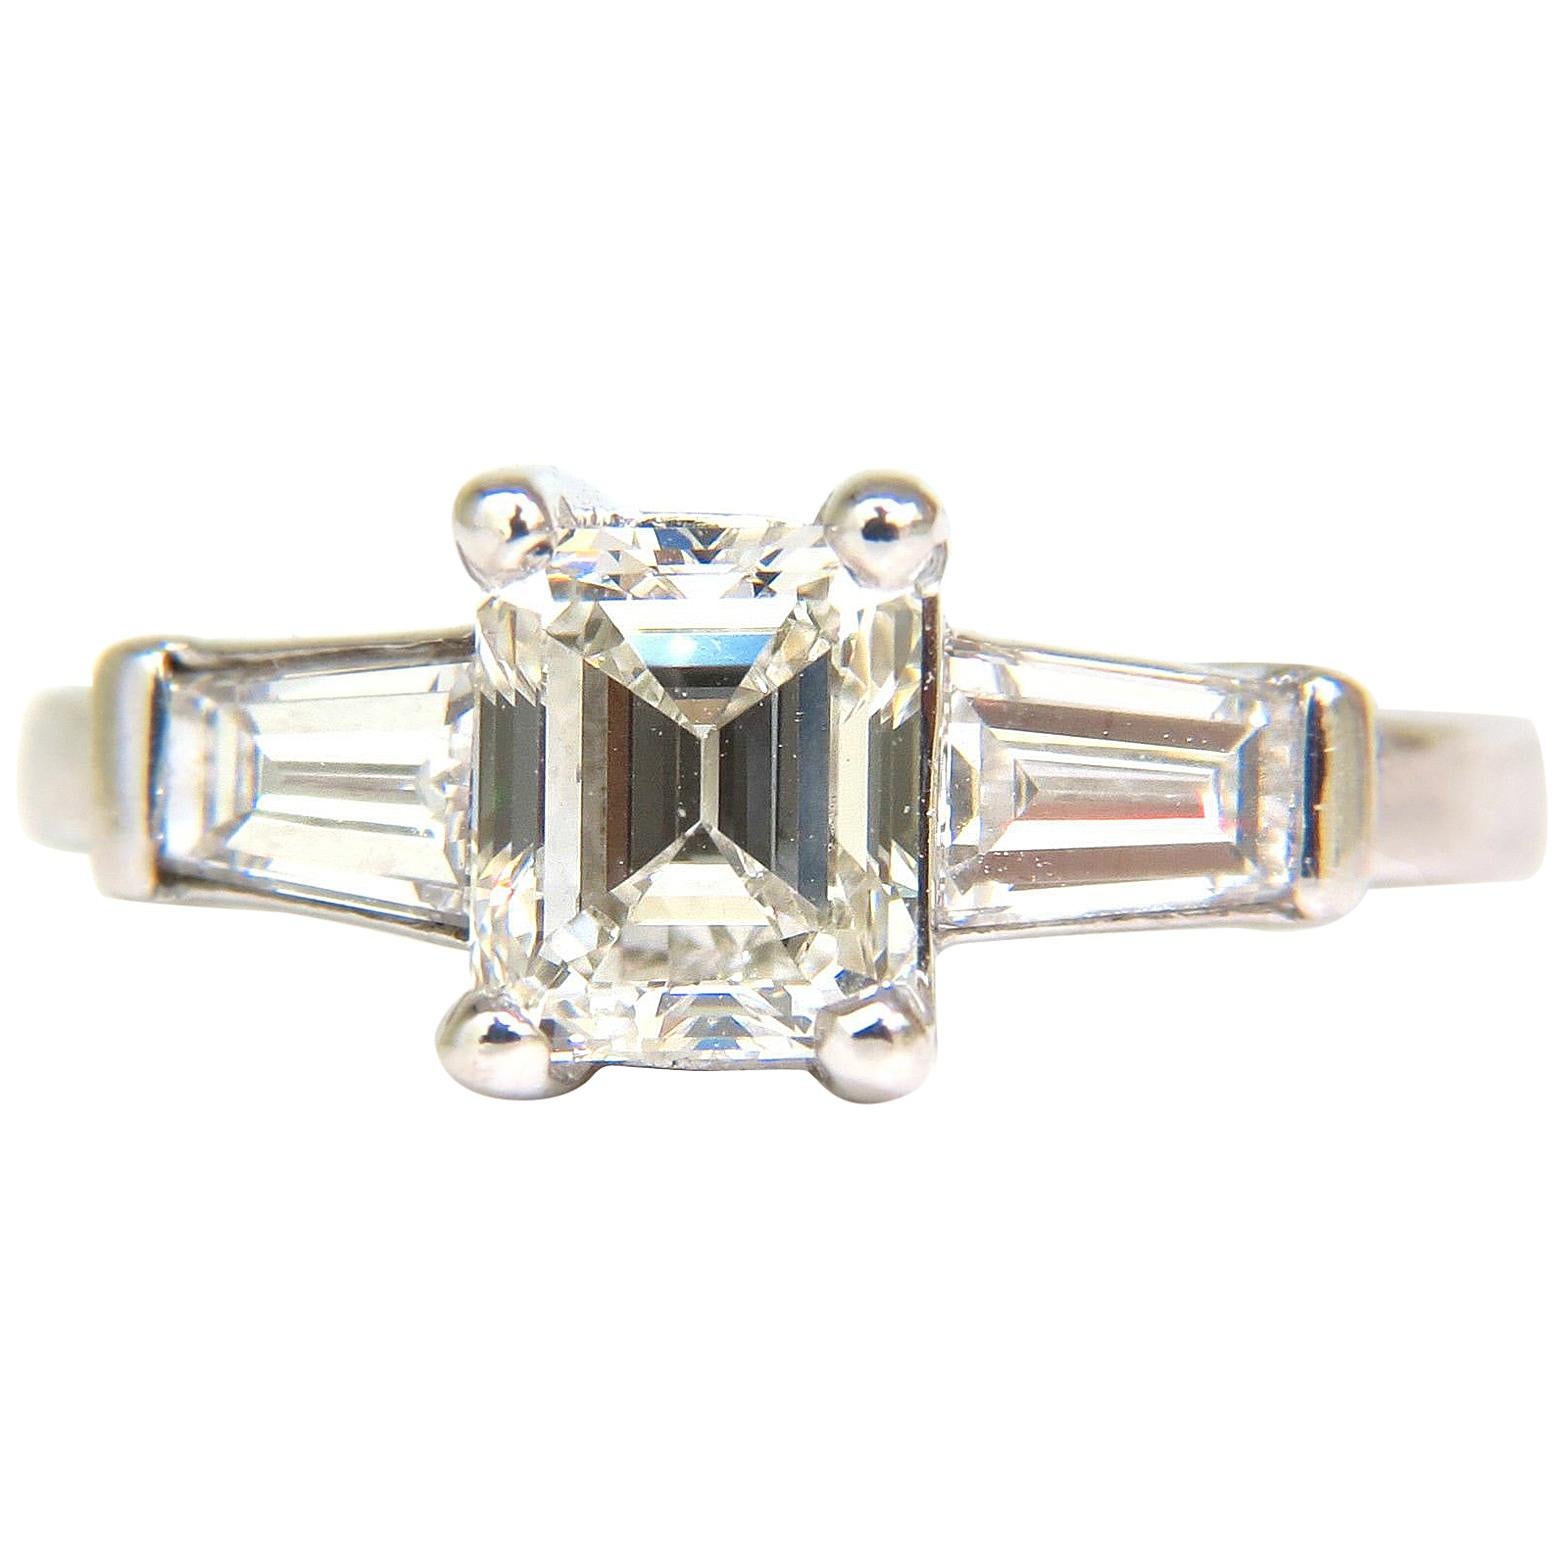 GIA 1.56 Carat Brilliant Emerald Cut Diamond Ring J/VVS2 Solitaire with Accents For Sale